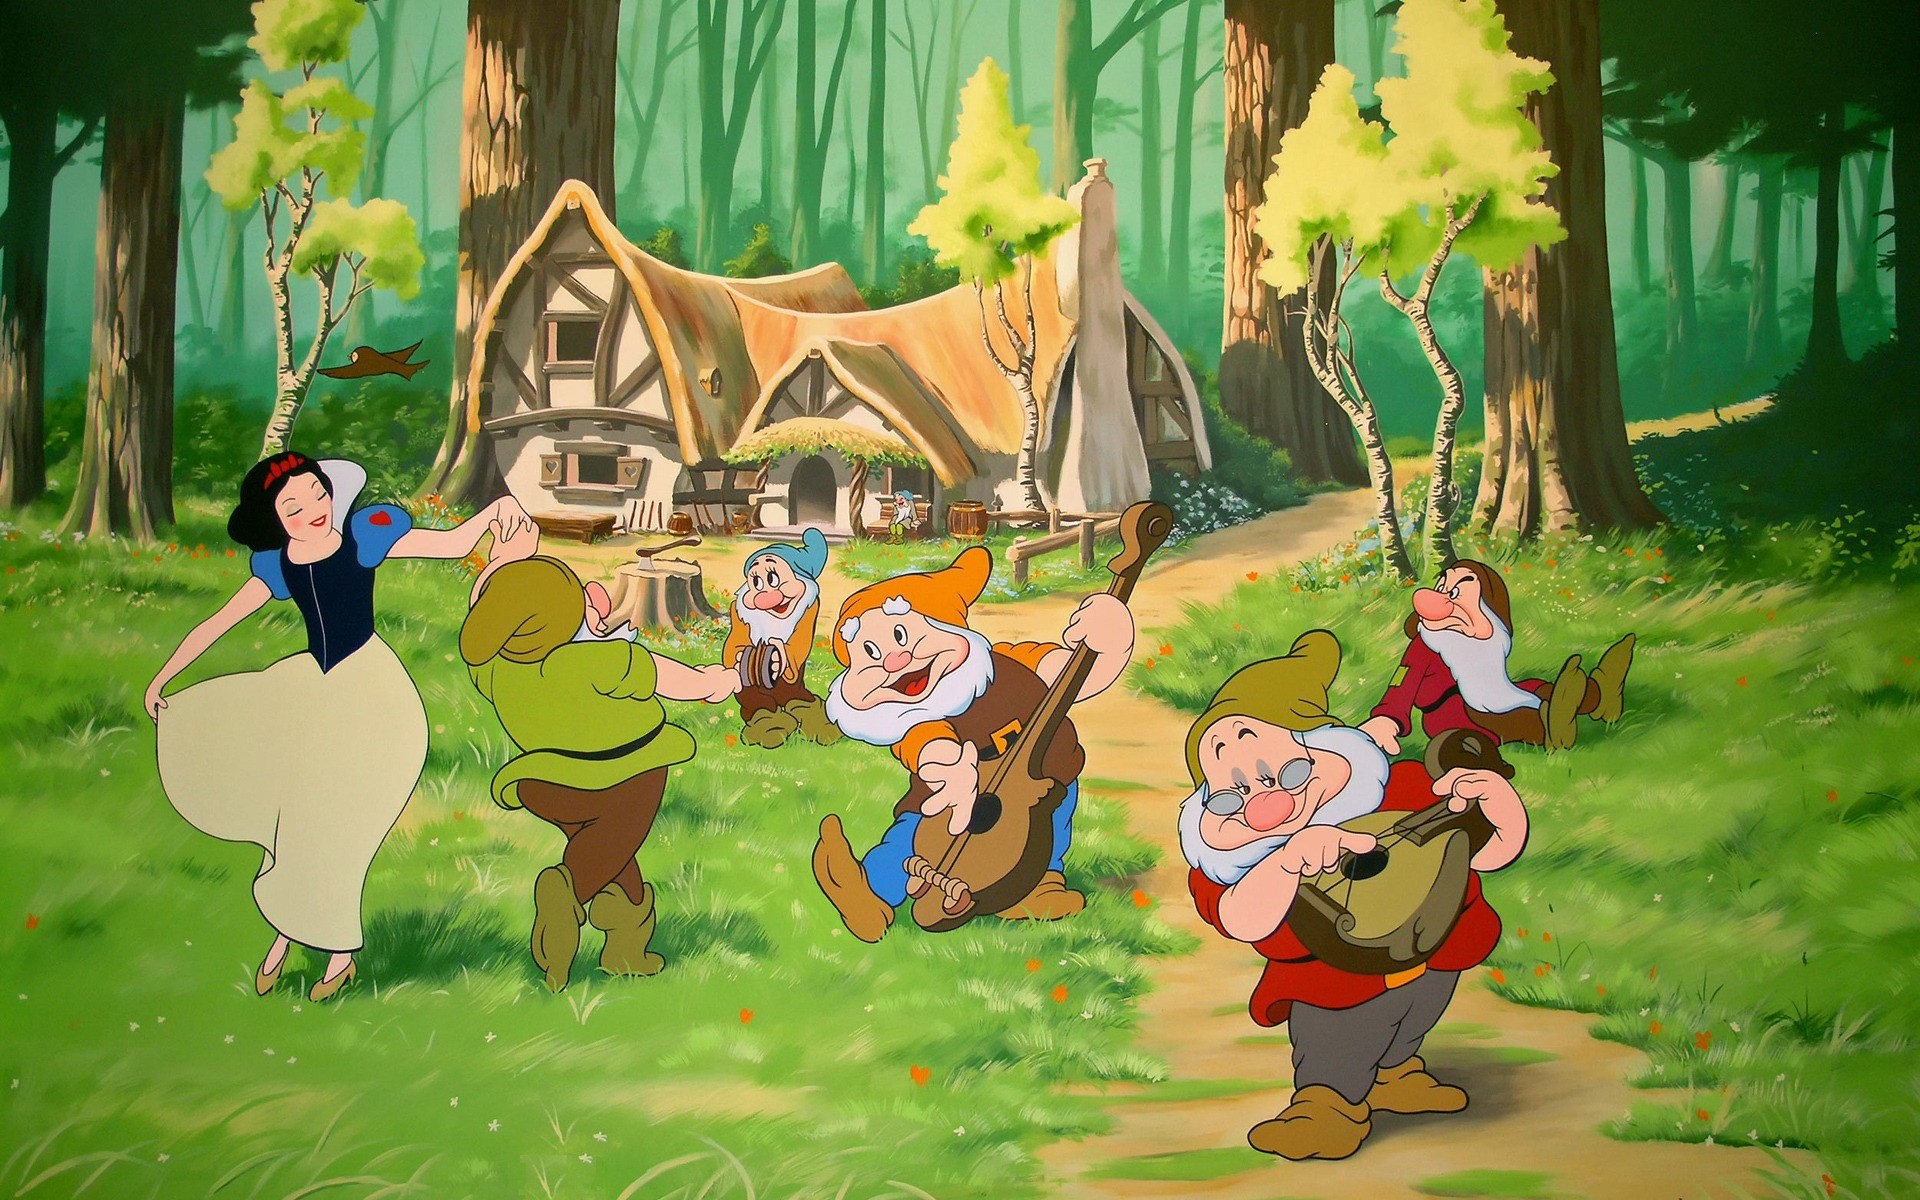 1920x1200 Snow White and the Seven Dwarfs Wallpaper Cartoons Anime Animated